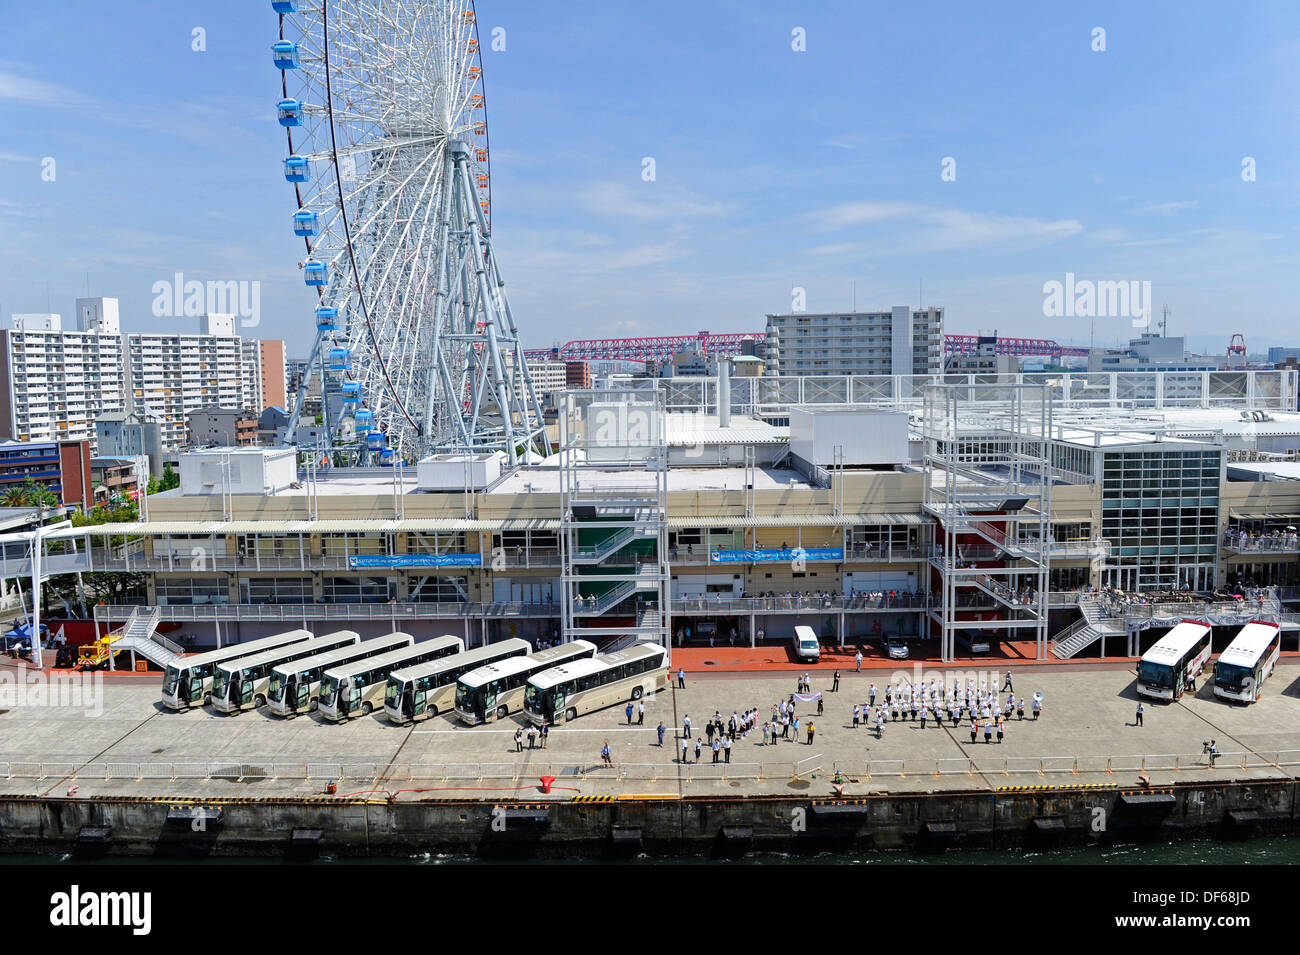 The main cruse docking quay at Kagoshima in Japan with waiting tourist buses and ferris wheel Stock Photo